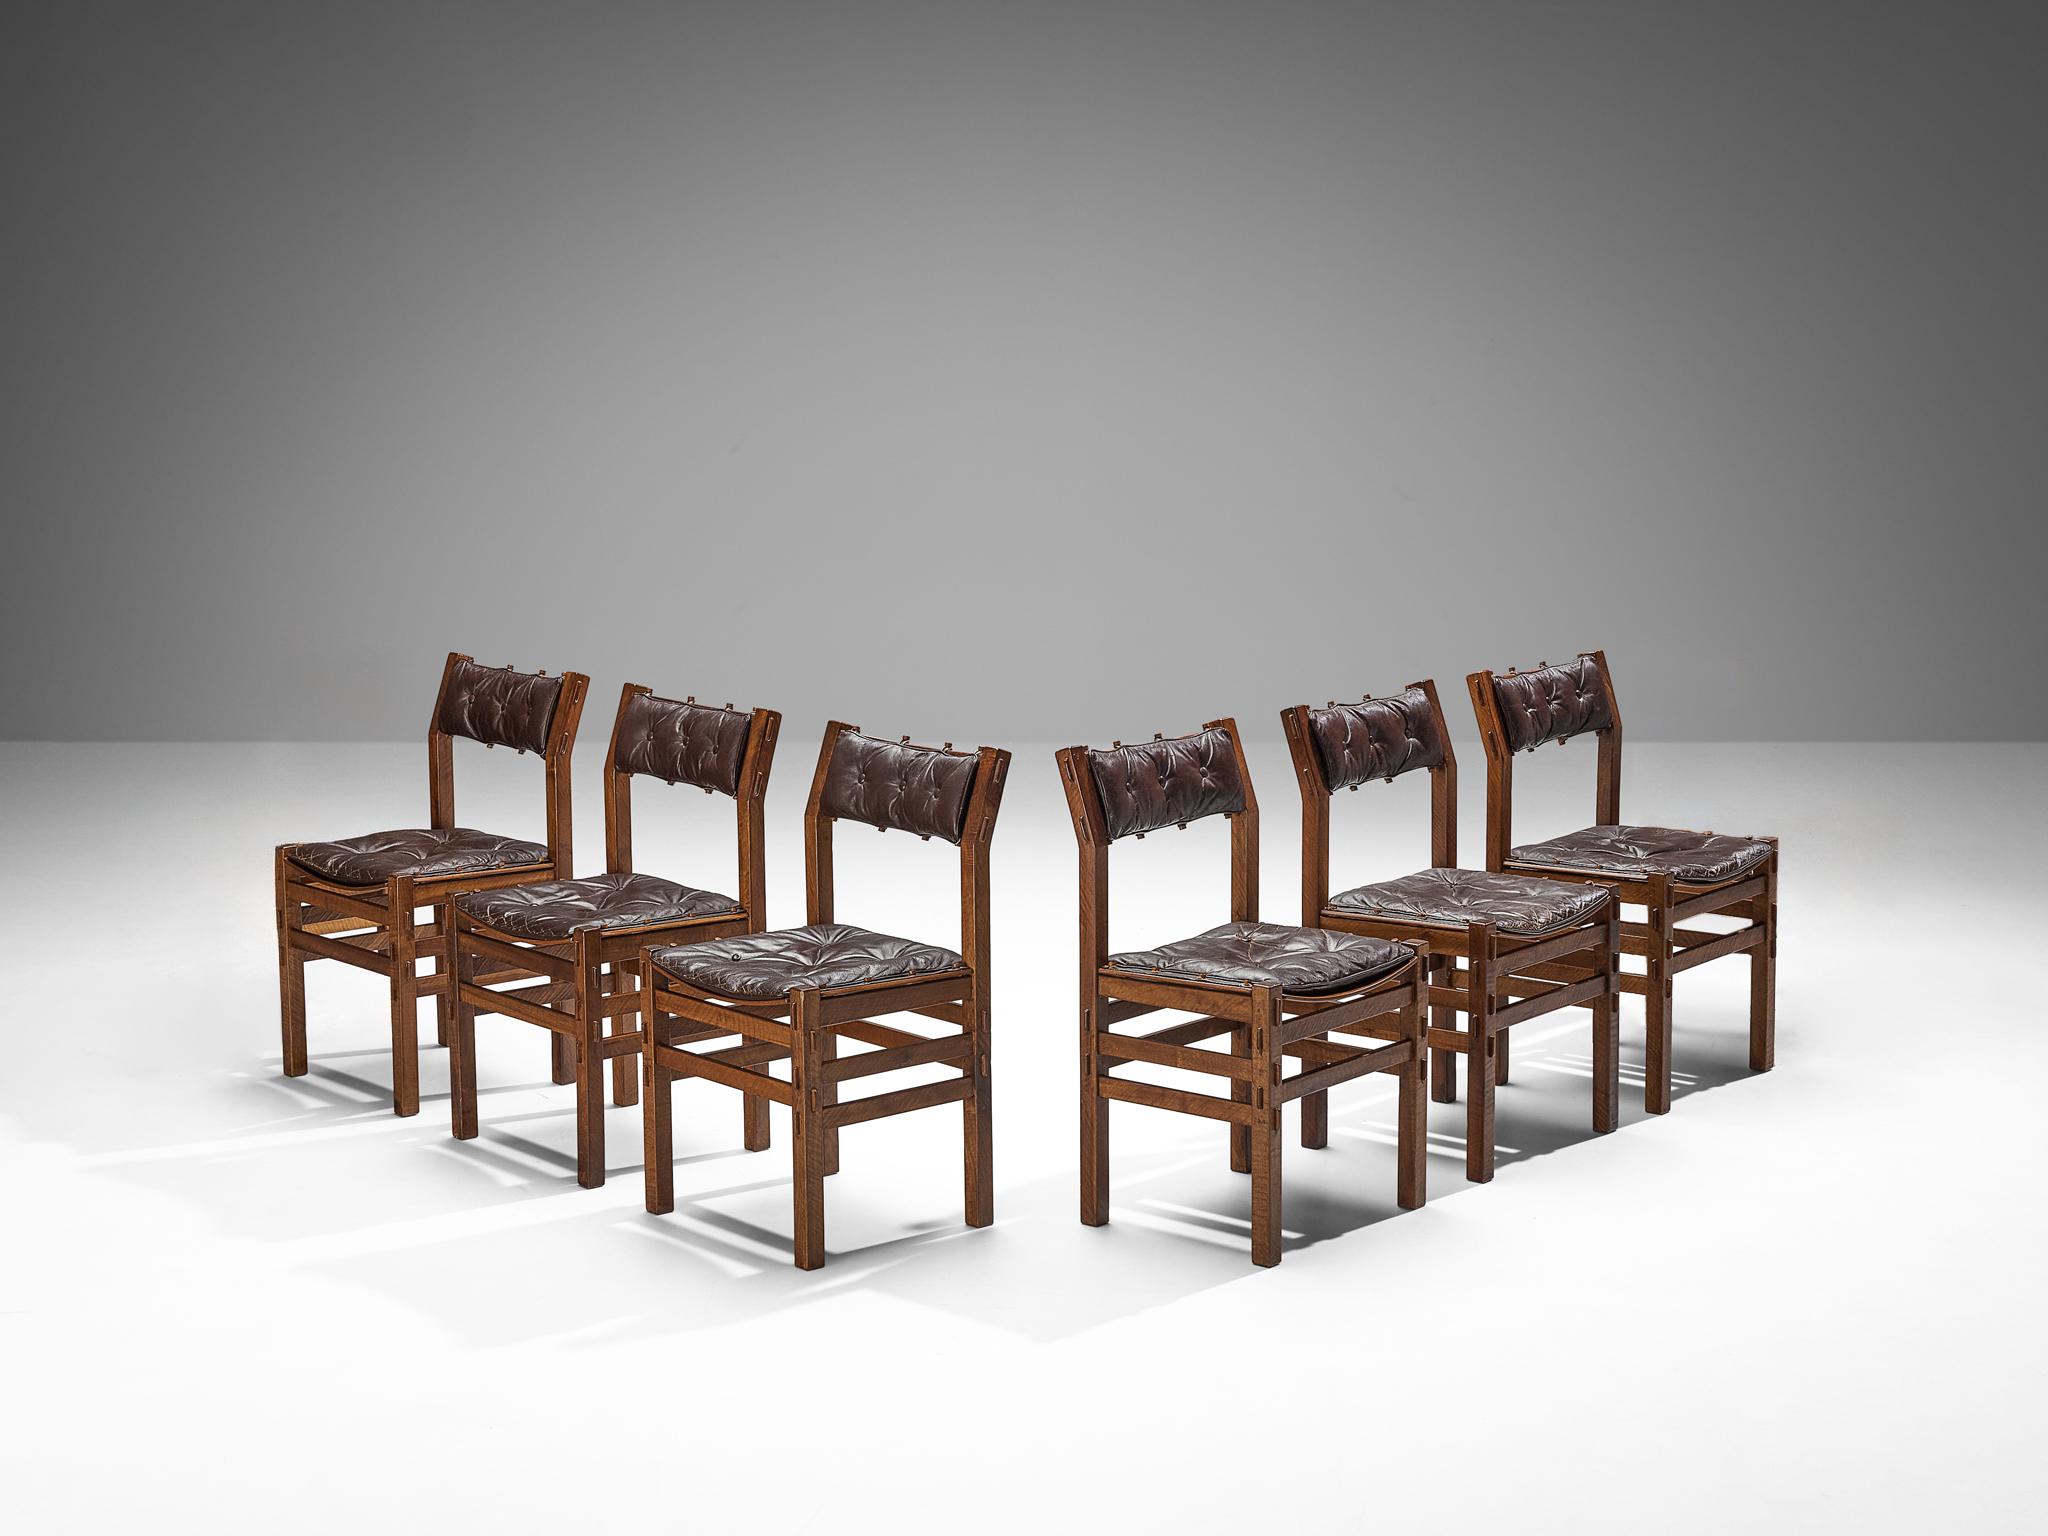 Giuseppe Rivadossi for Officina Rivadossi, set of six dining chairs, walnut, leather, Italy, 1970s

An exceptional set of chairs by the Italian sculptor and designer Giuseppe Rivadossi, featuring a high level of craftsmanship in woodwork. The chairs